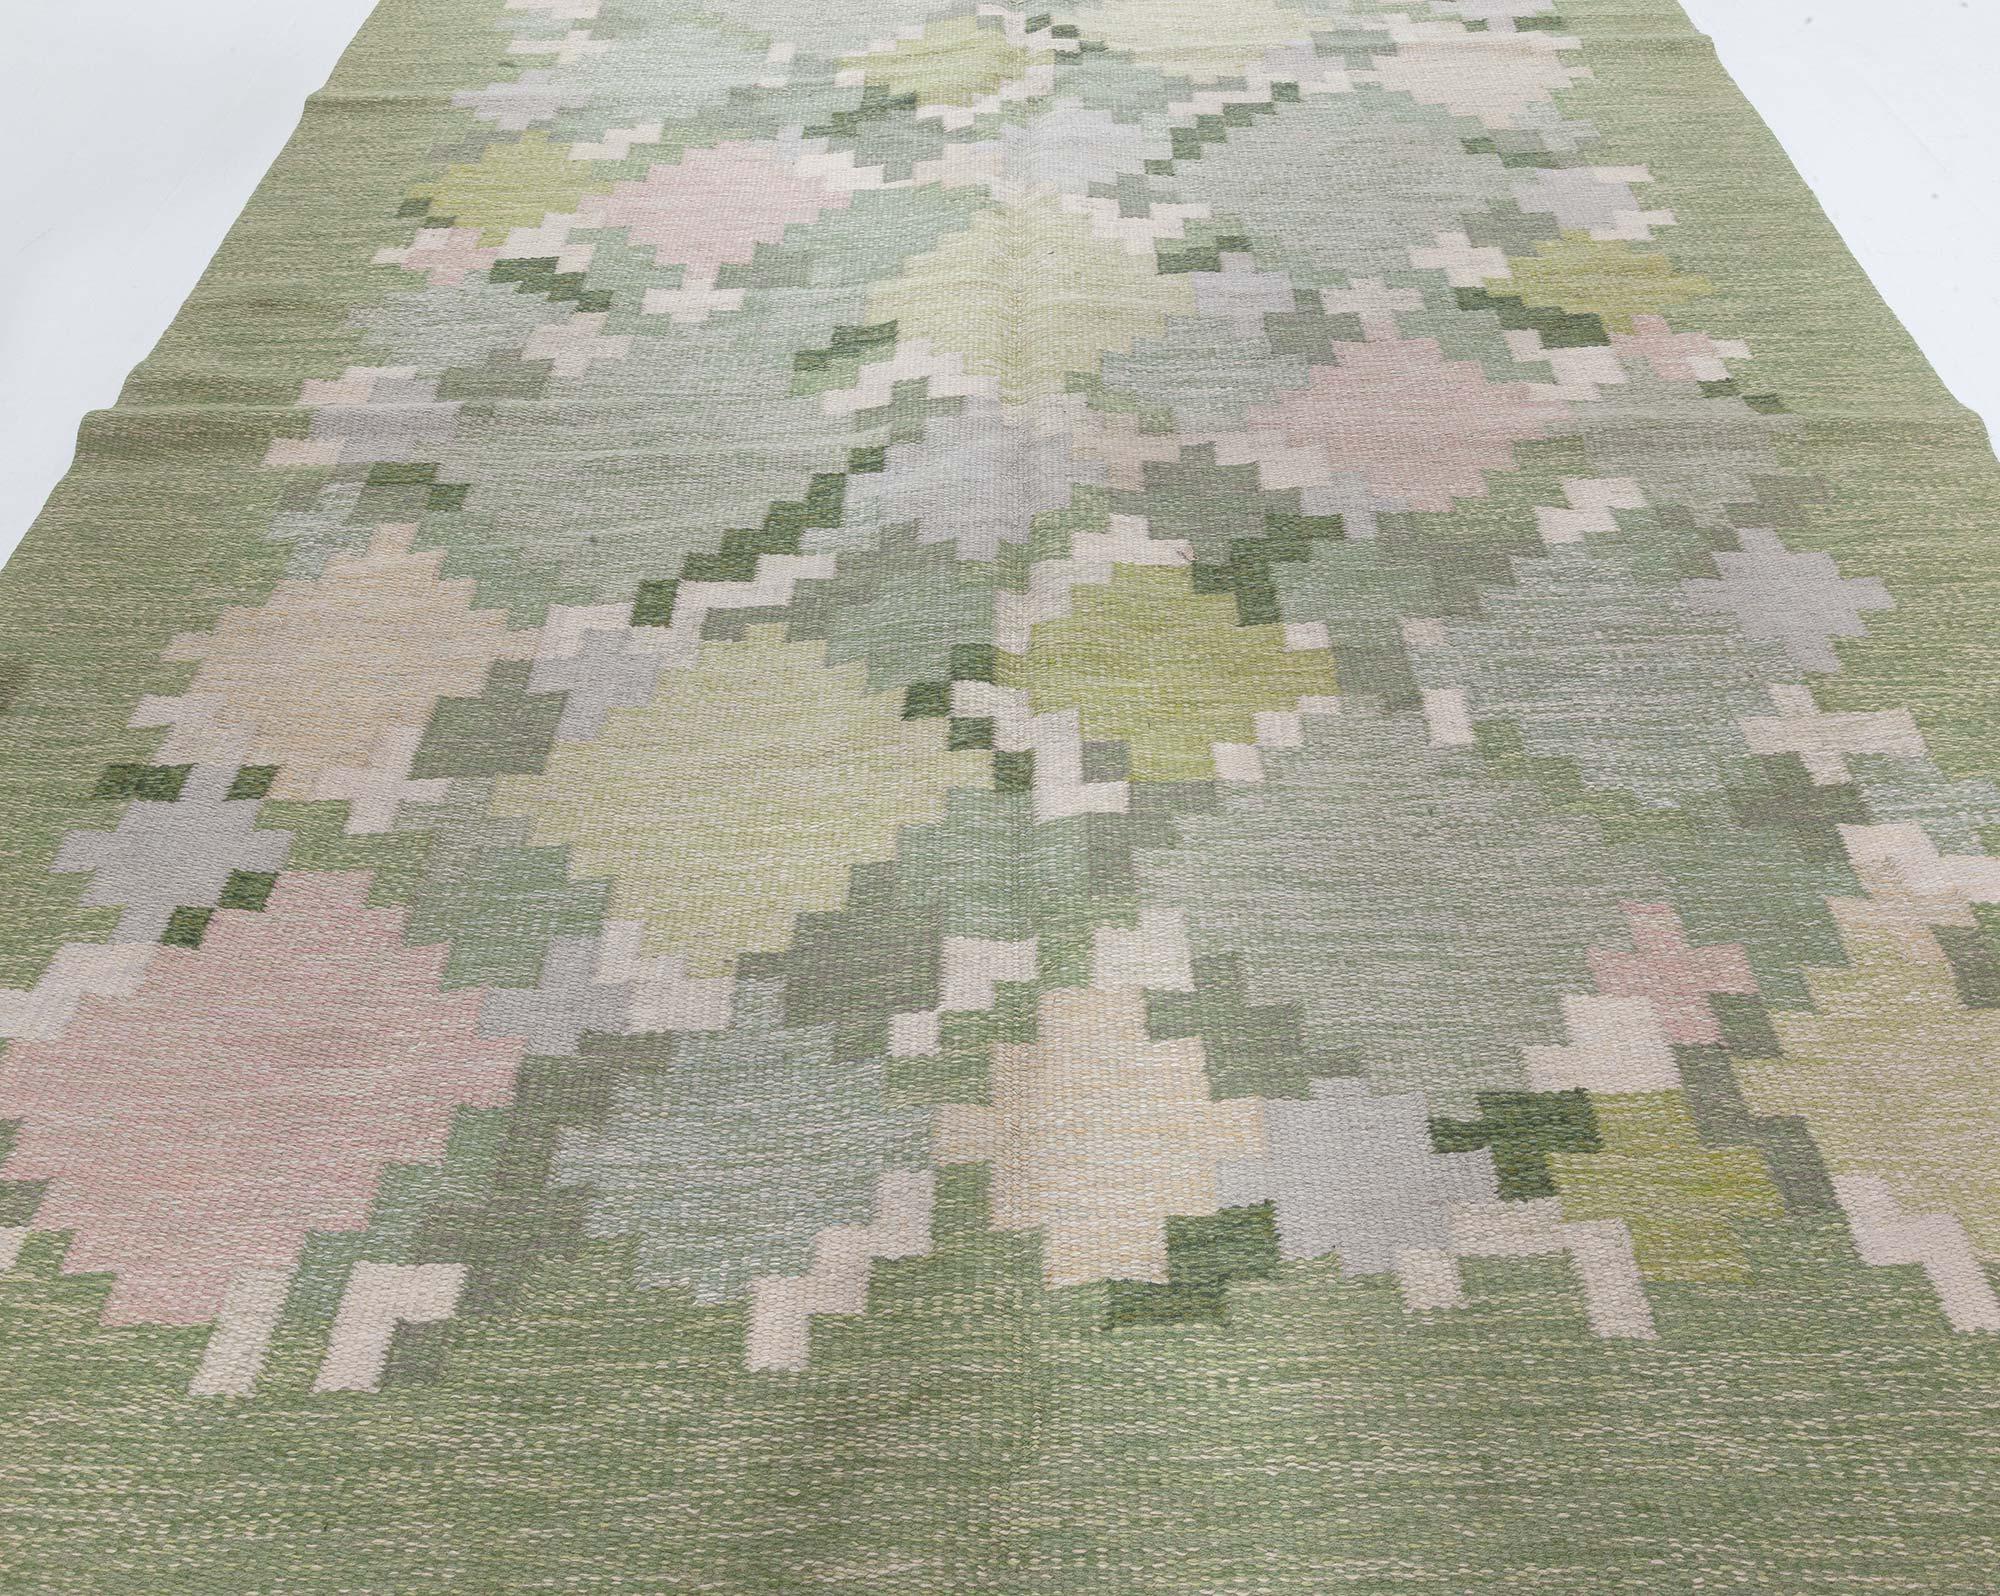 Hand-Woven Mid-20th Century Swedish Pea Green Background Flat Weave Rug by Ingegerd Silow For Sale